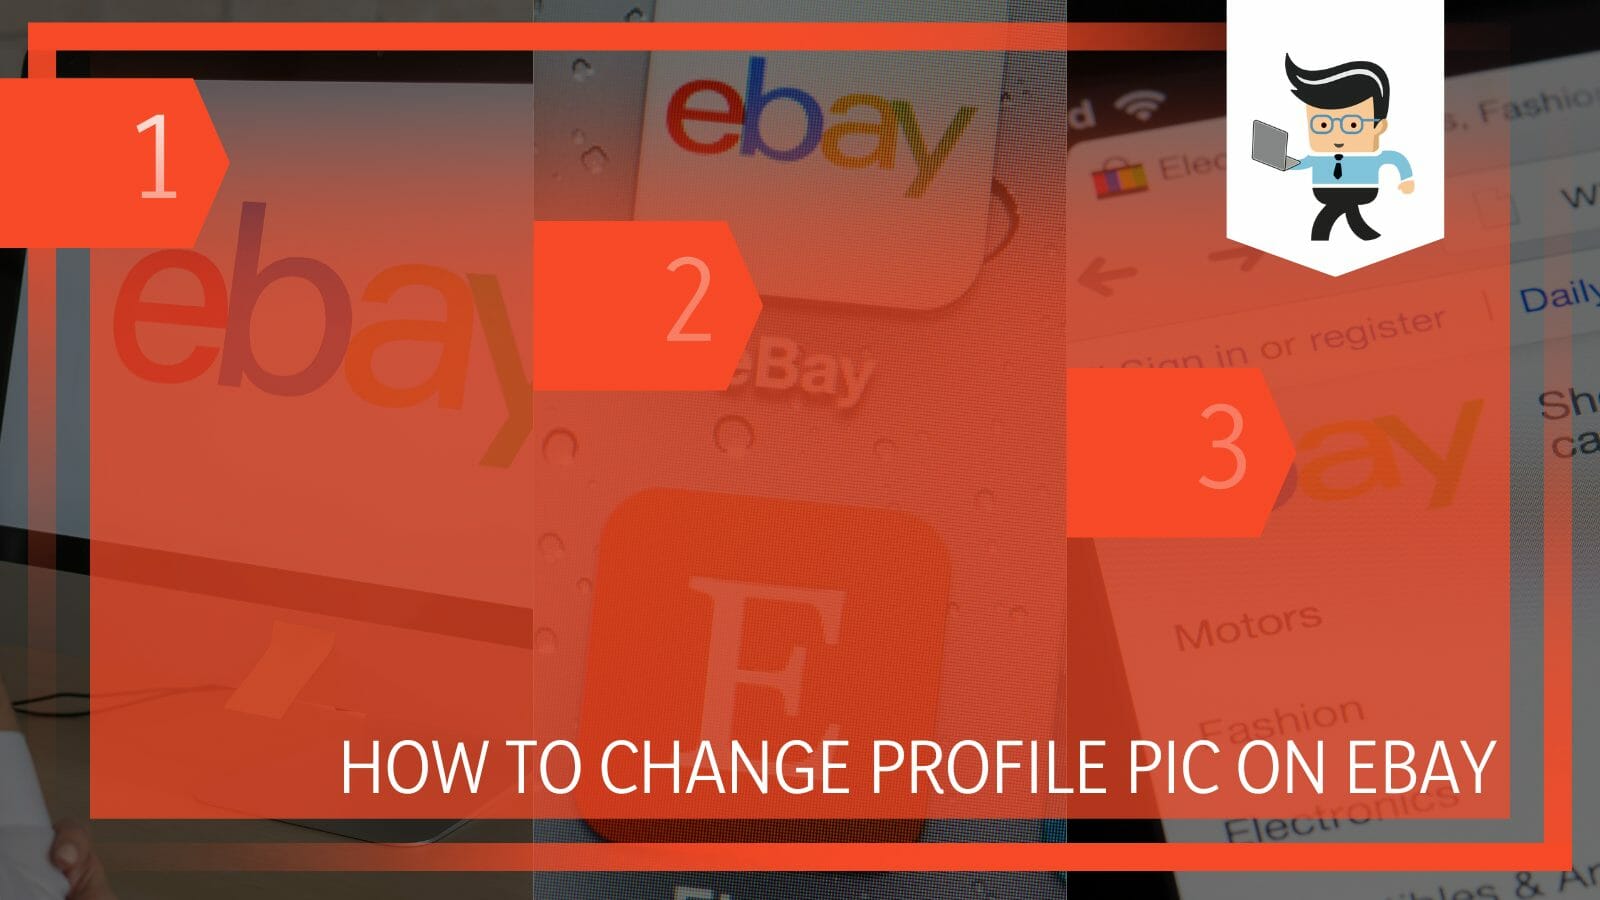 How to Change Profile Pic on eBay